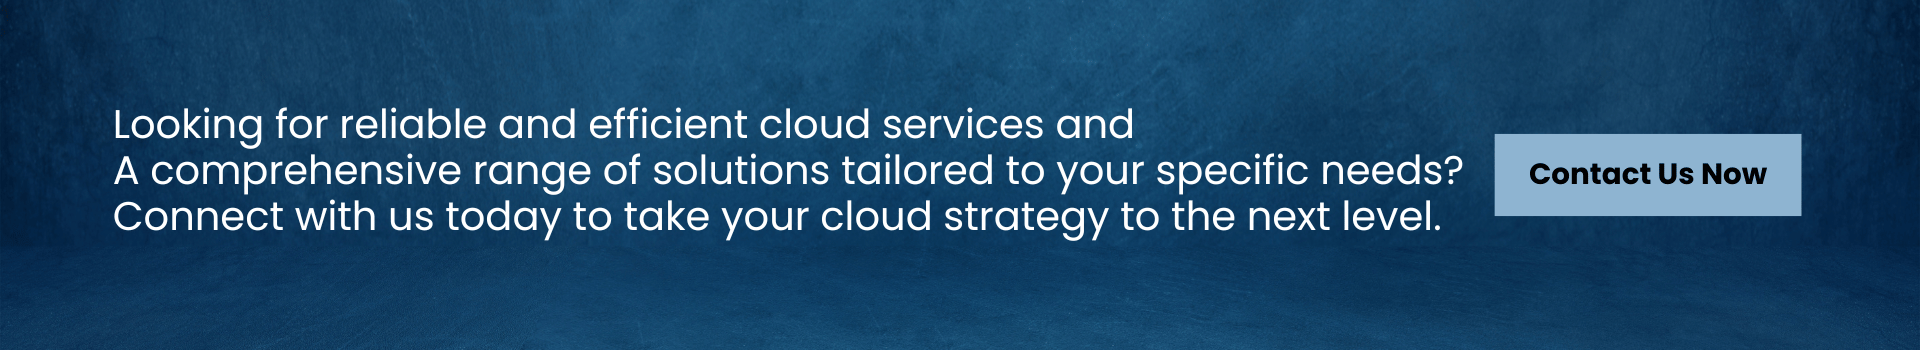 Comparing the Top Cloud Service Providers